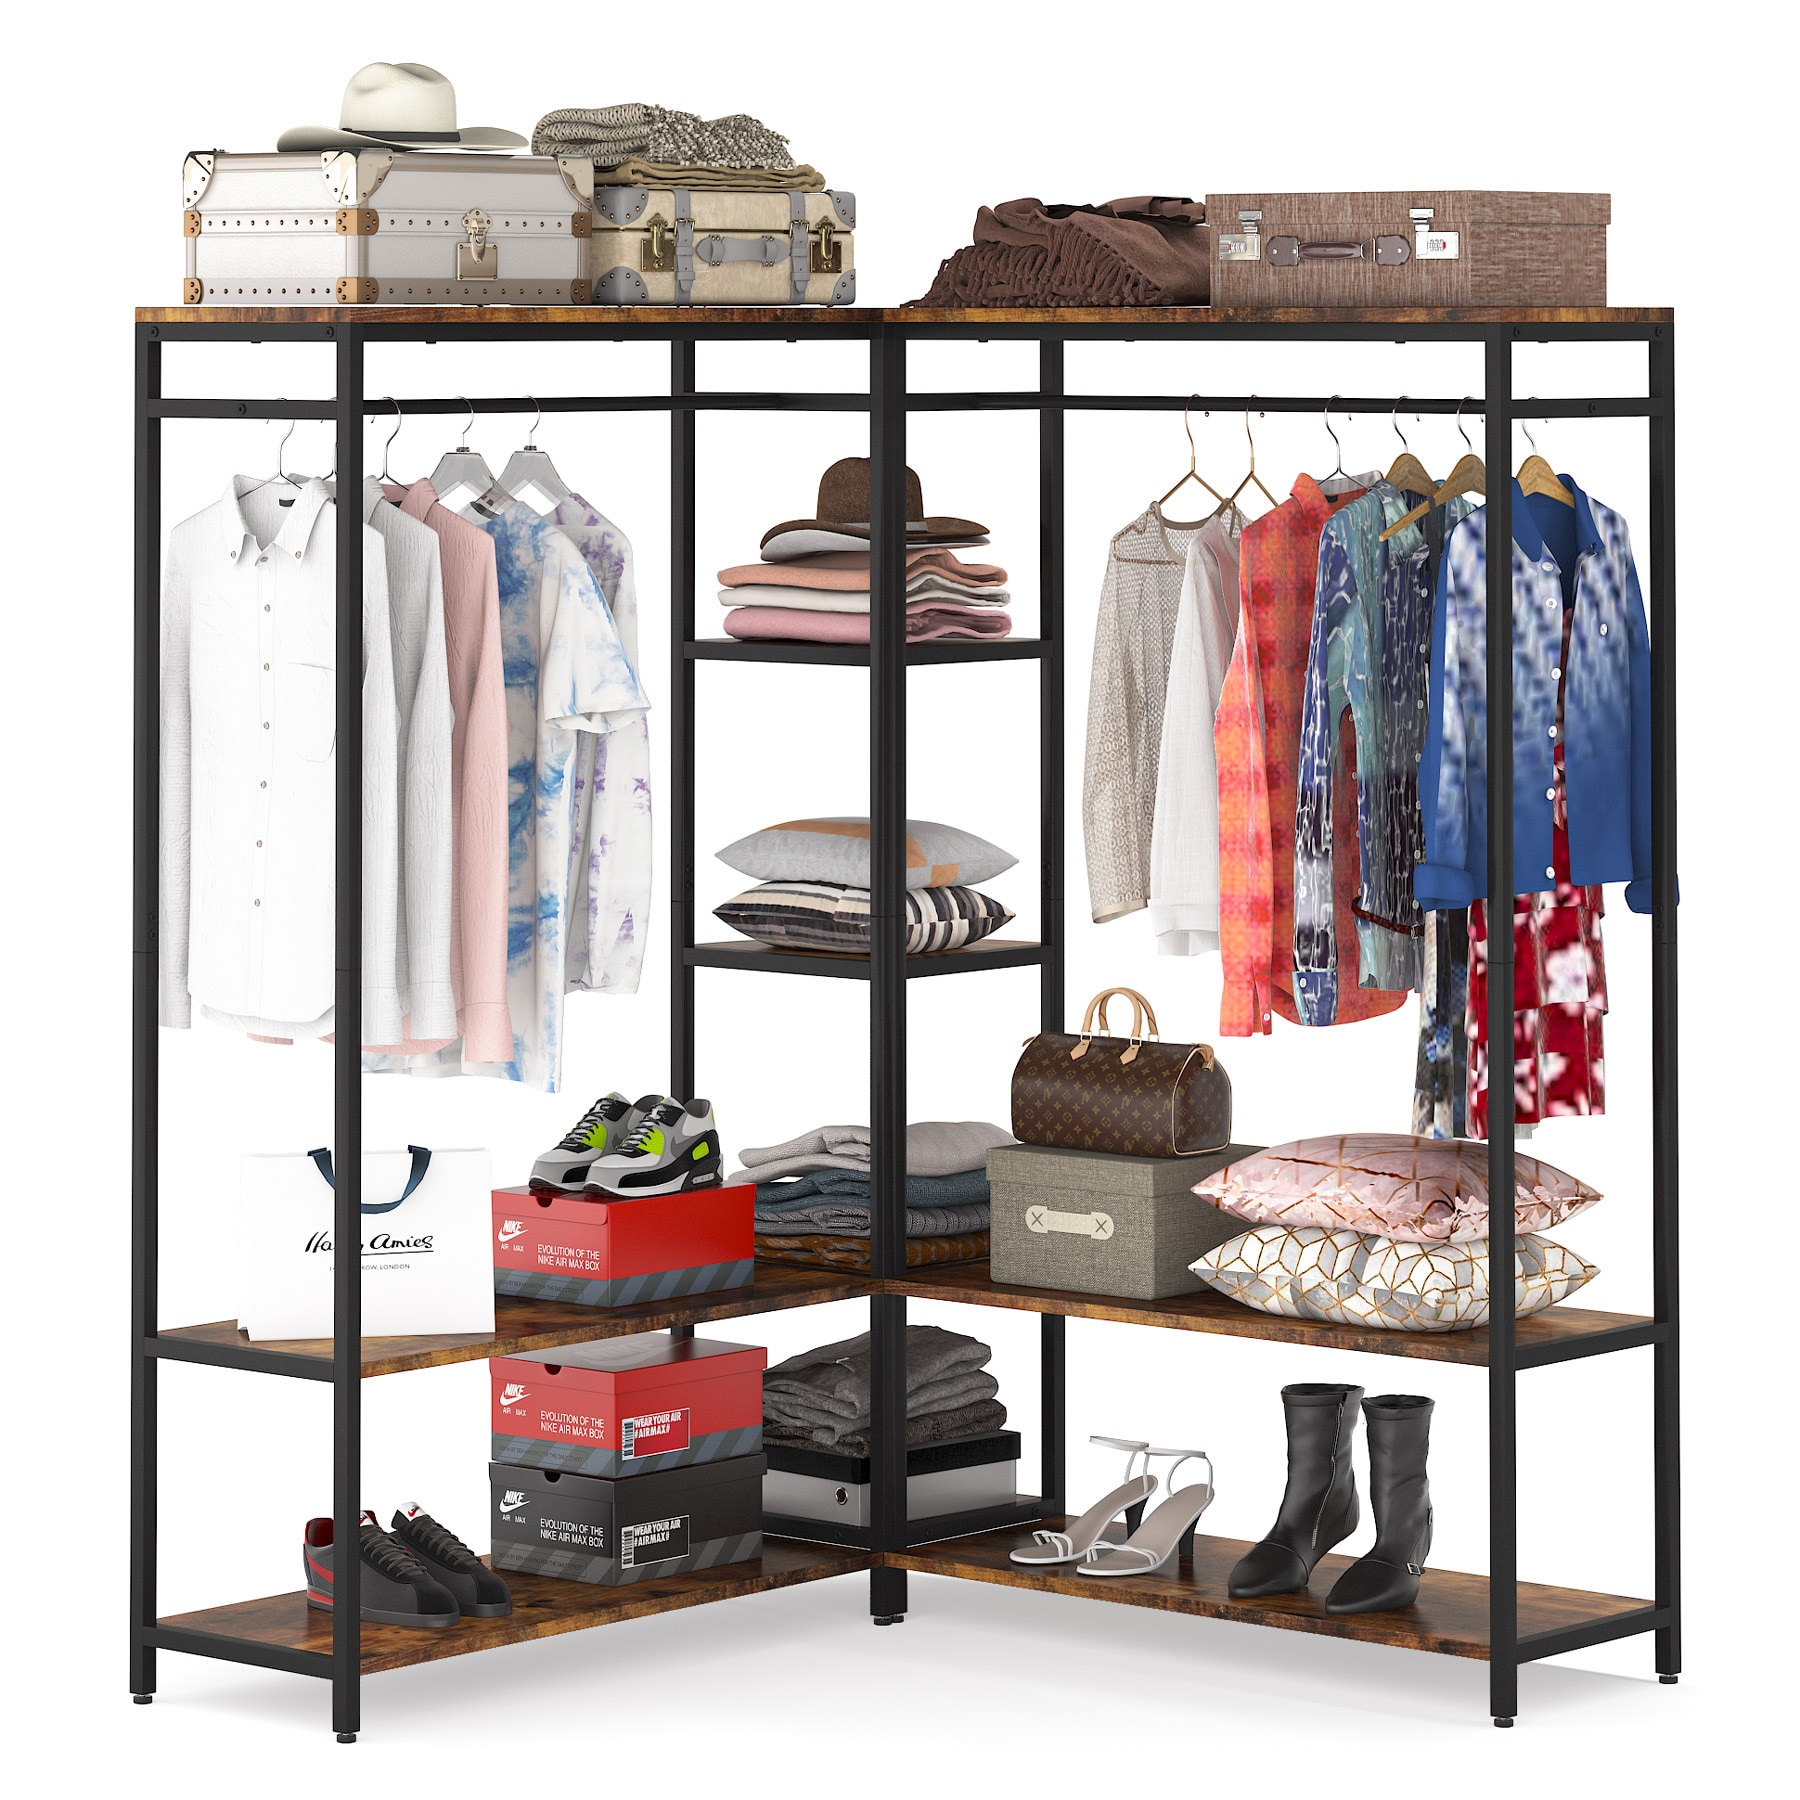 Heavy Duty L Shape Clothes Rack,Freestanding Corner Closet Organizer,Large Garment Rack with Storage Shelves and Hanging Rods - Rustic Brown+Black